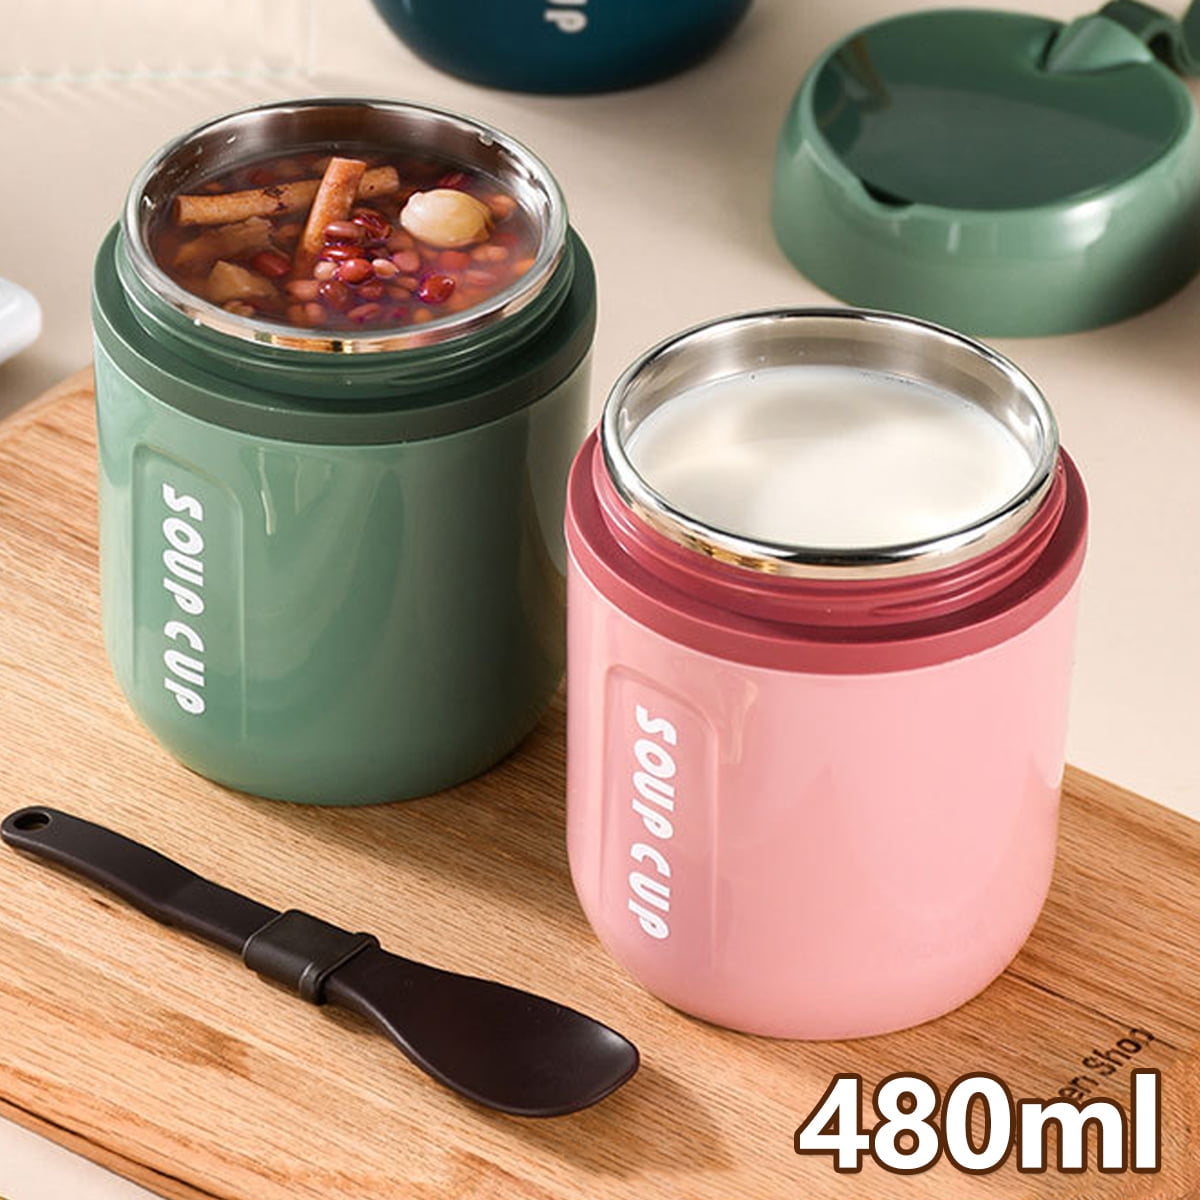 Tzgsonp 480ml Soup Cup Lunch Box Stainless Steel Thermos Mug Food